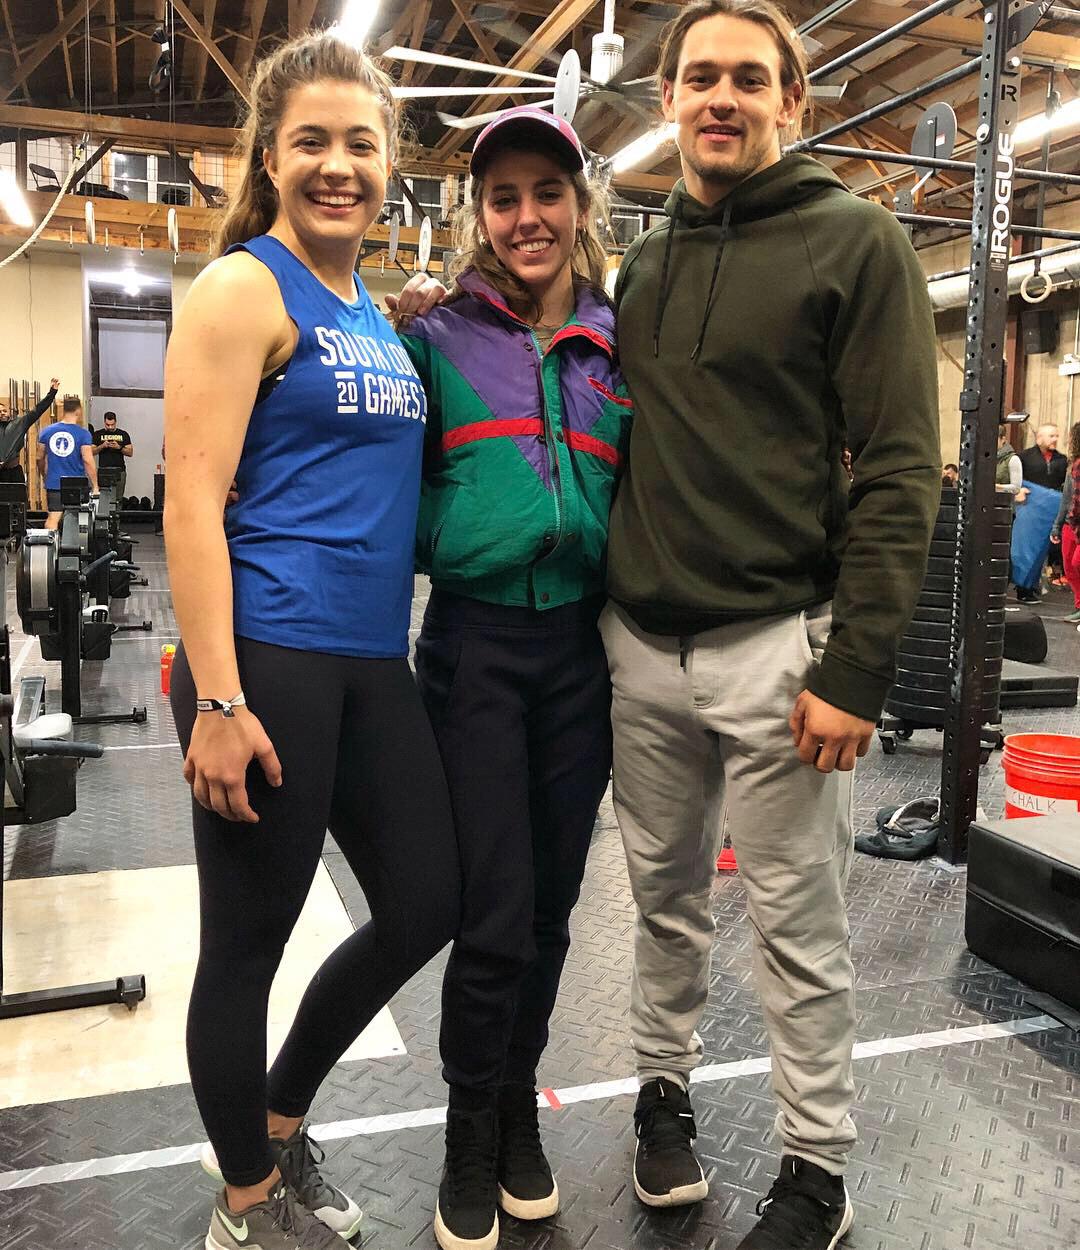 Taken after Justin competed in the South Loop Crossfit competition 2018 in Chicago